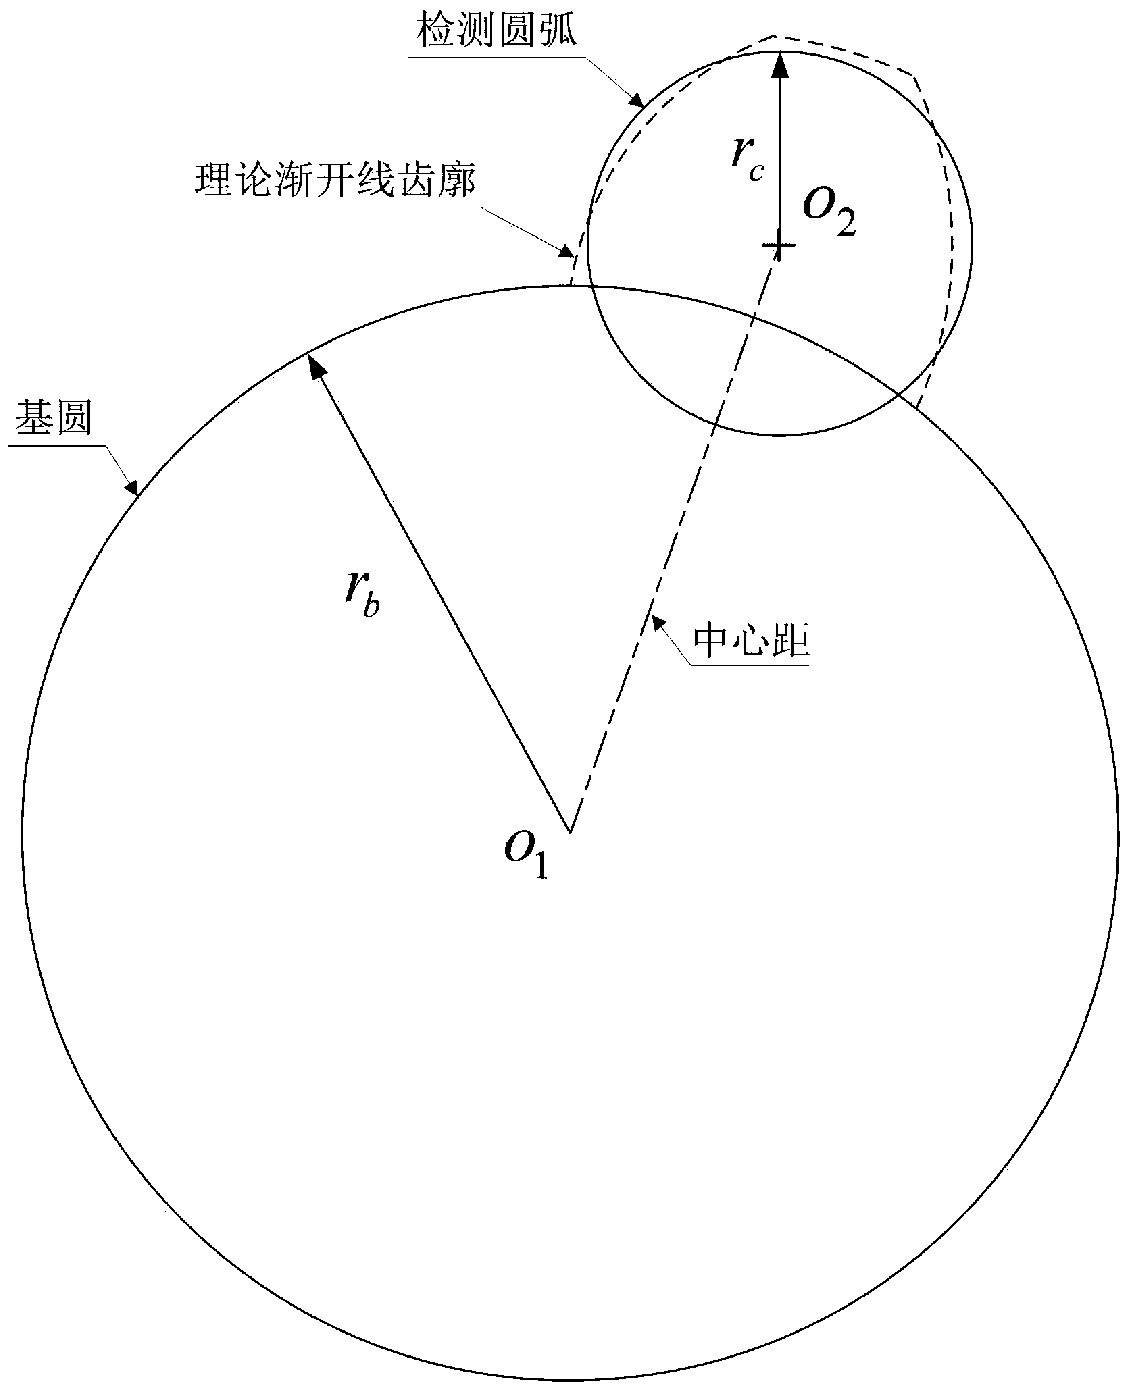 Design method suitable for evaluating large involute template of involute measuring instrument